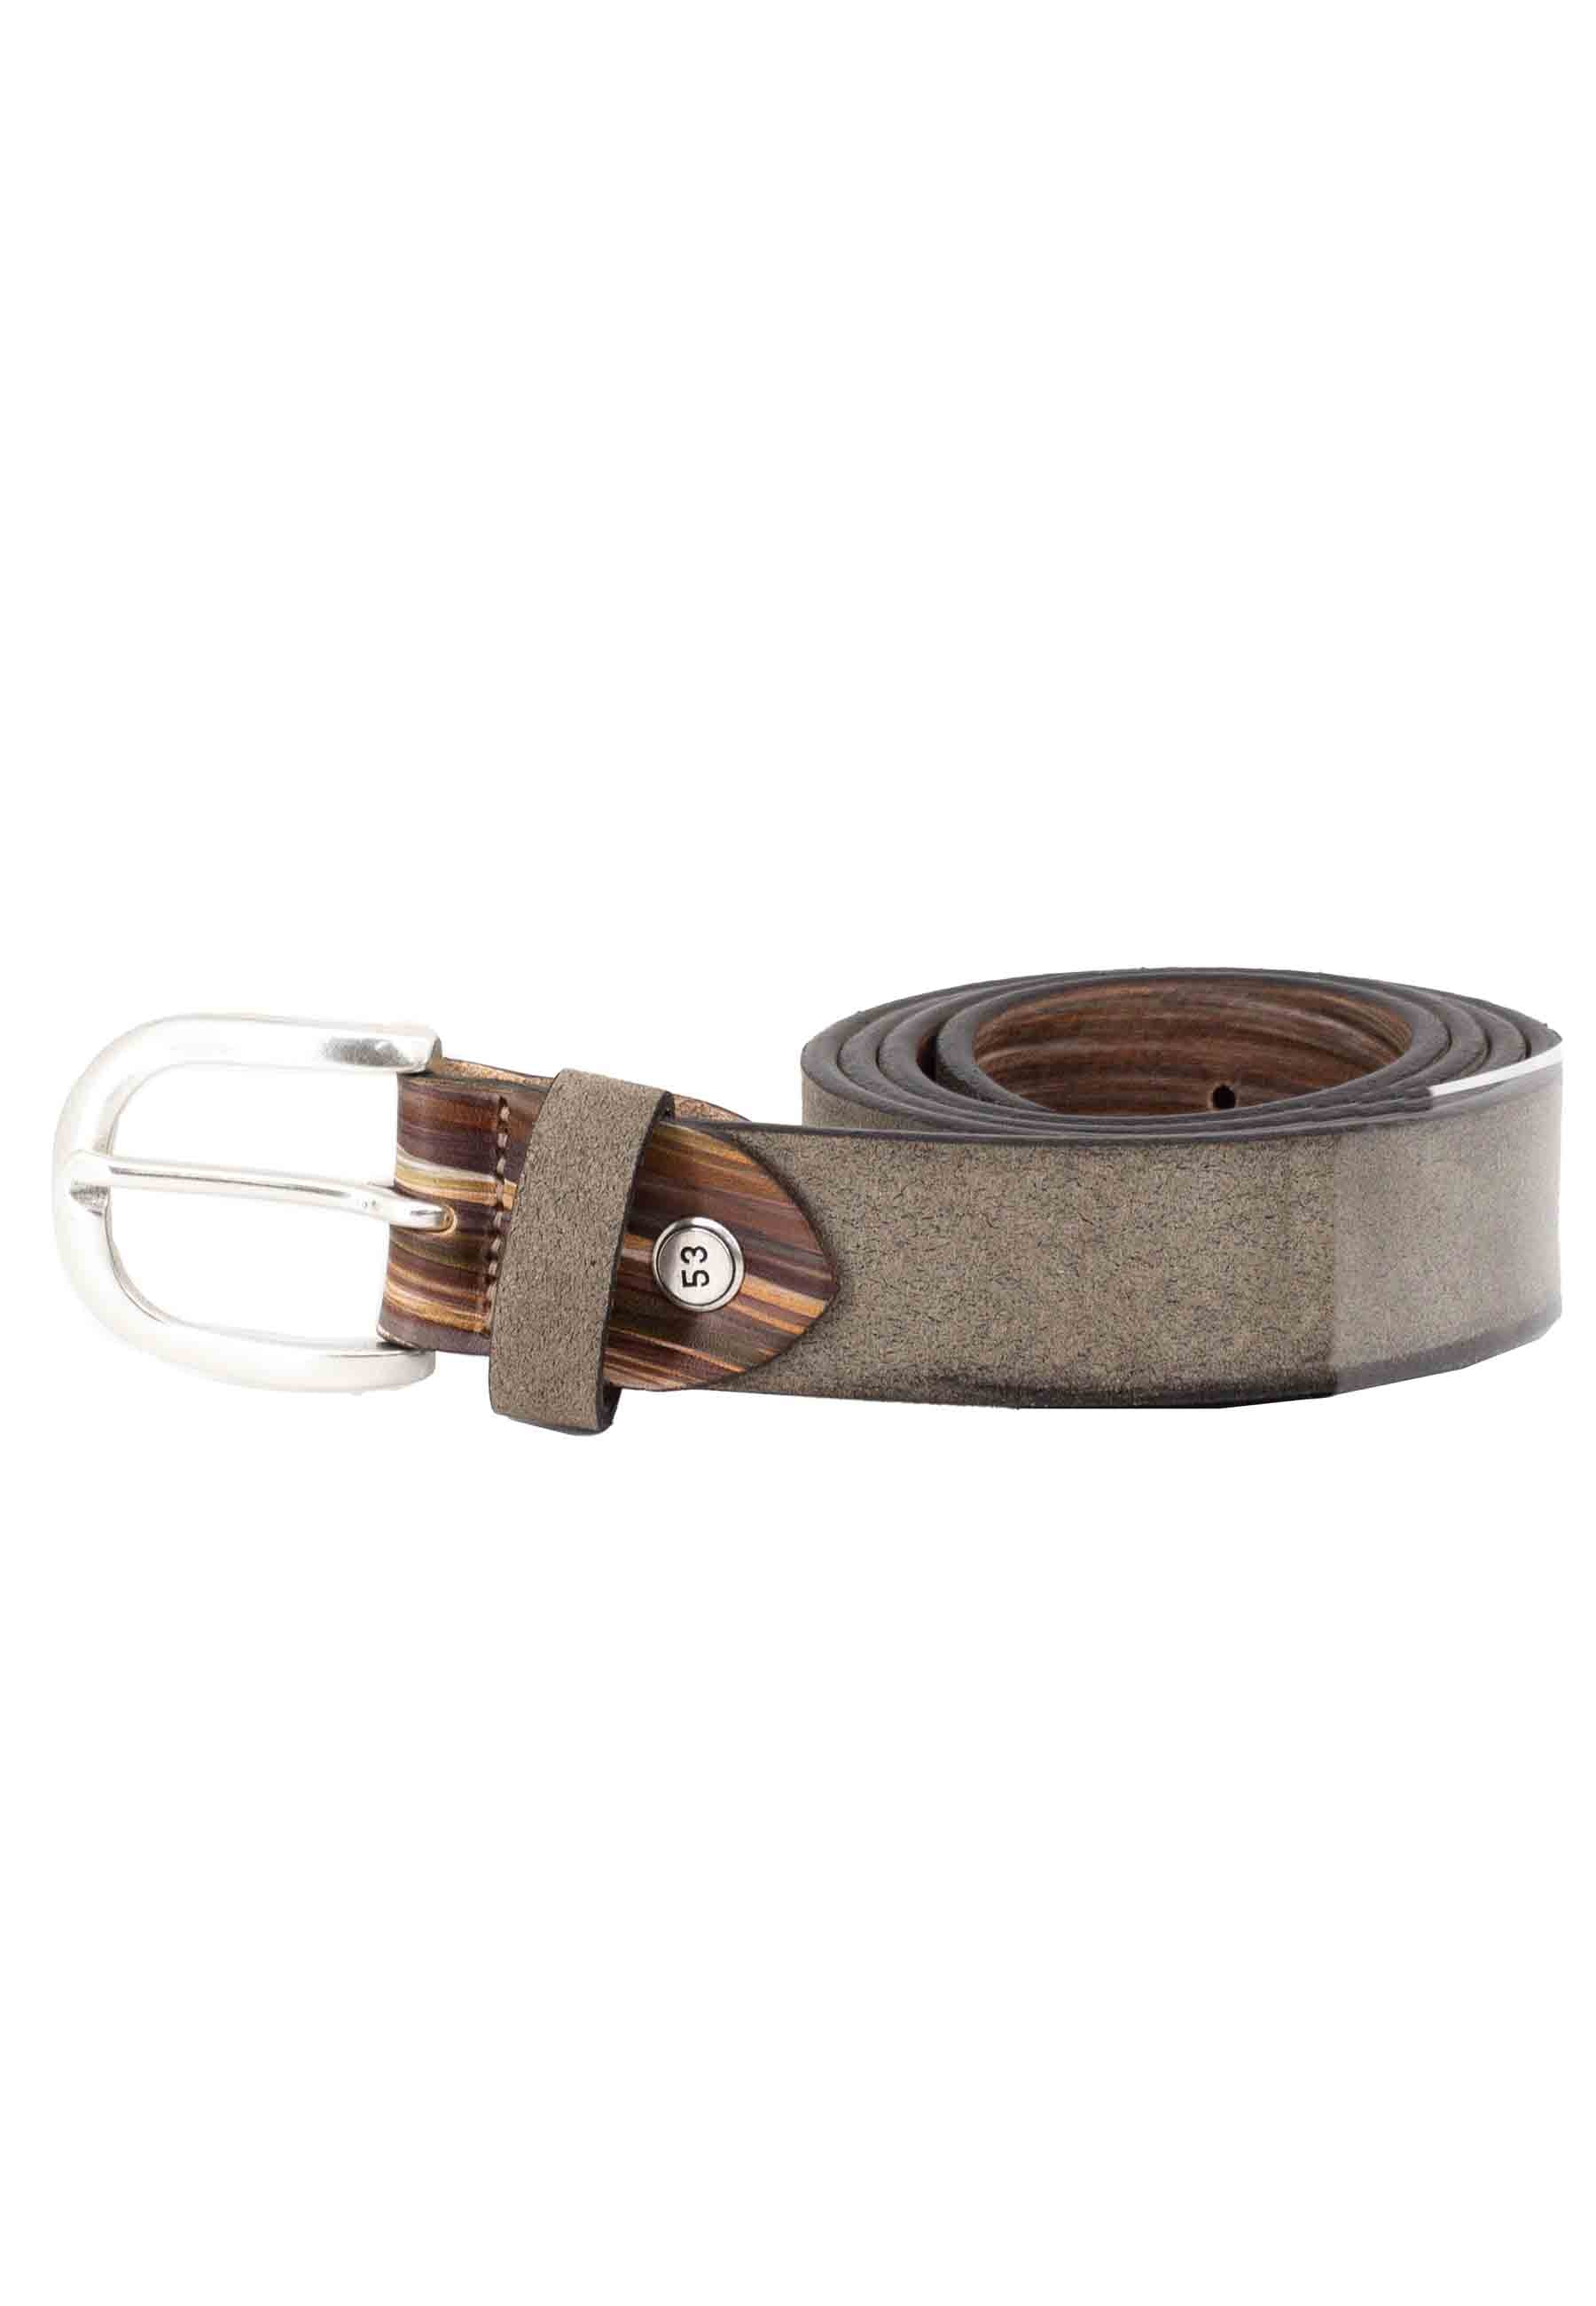 Men's taupe nubuck belt with silver buckle